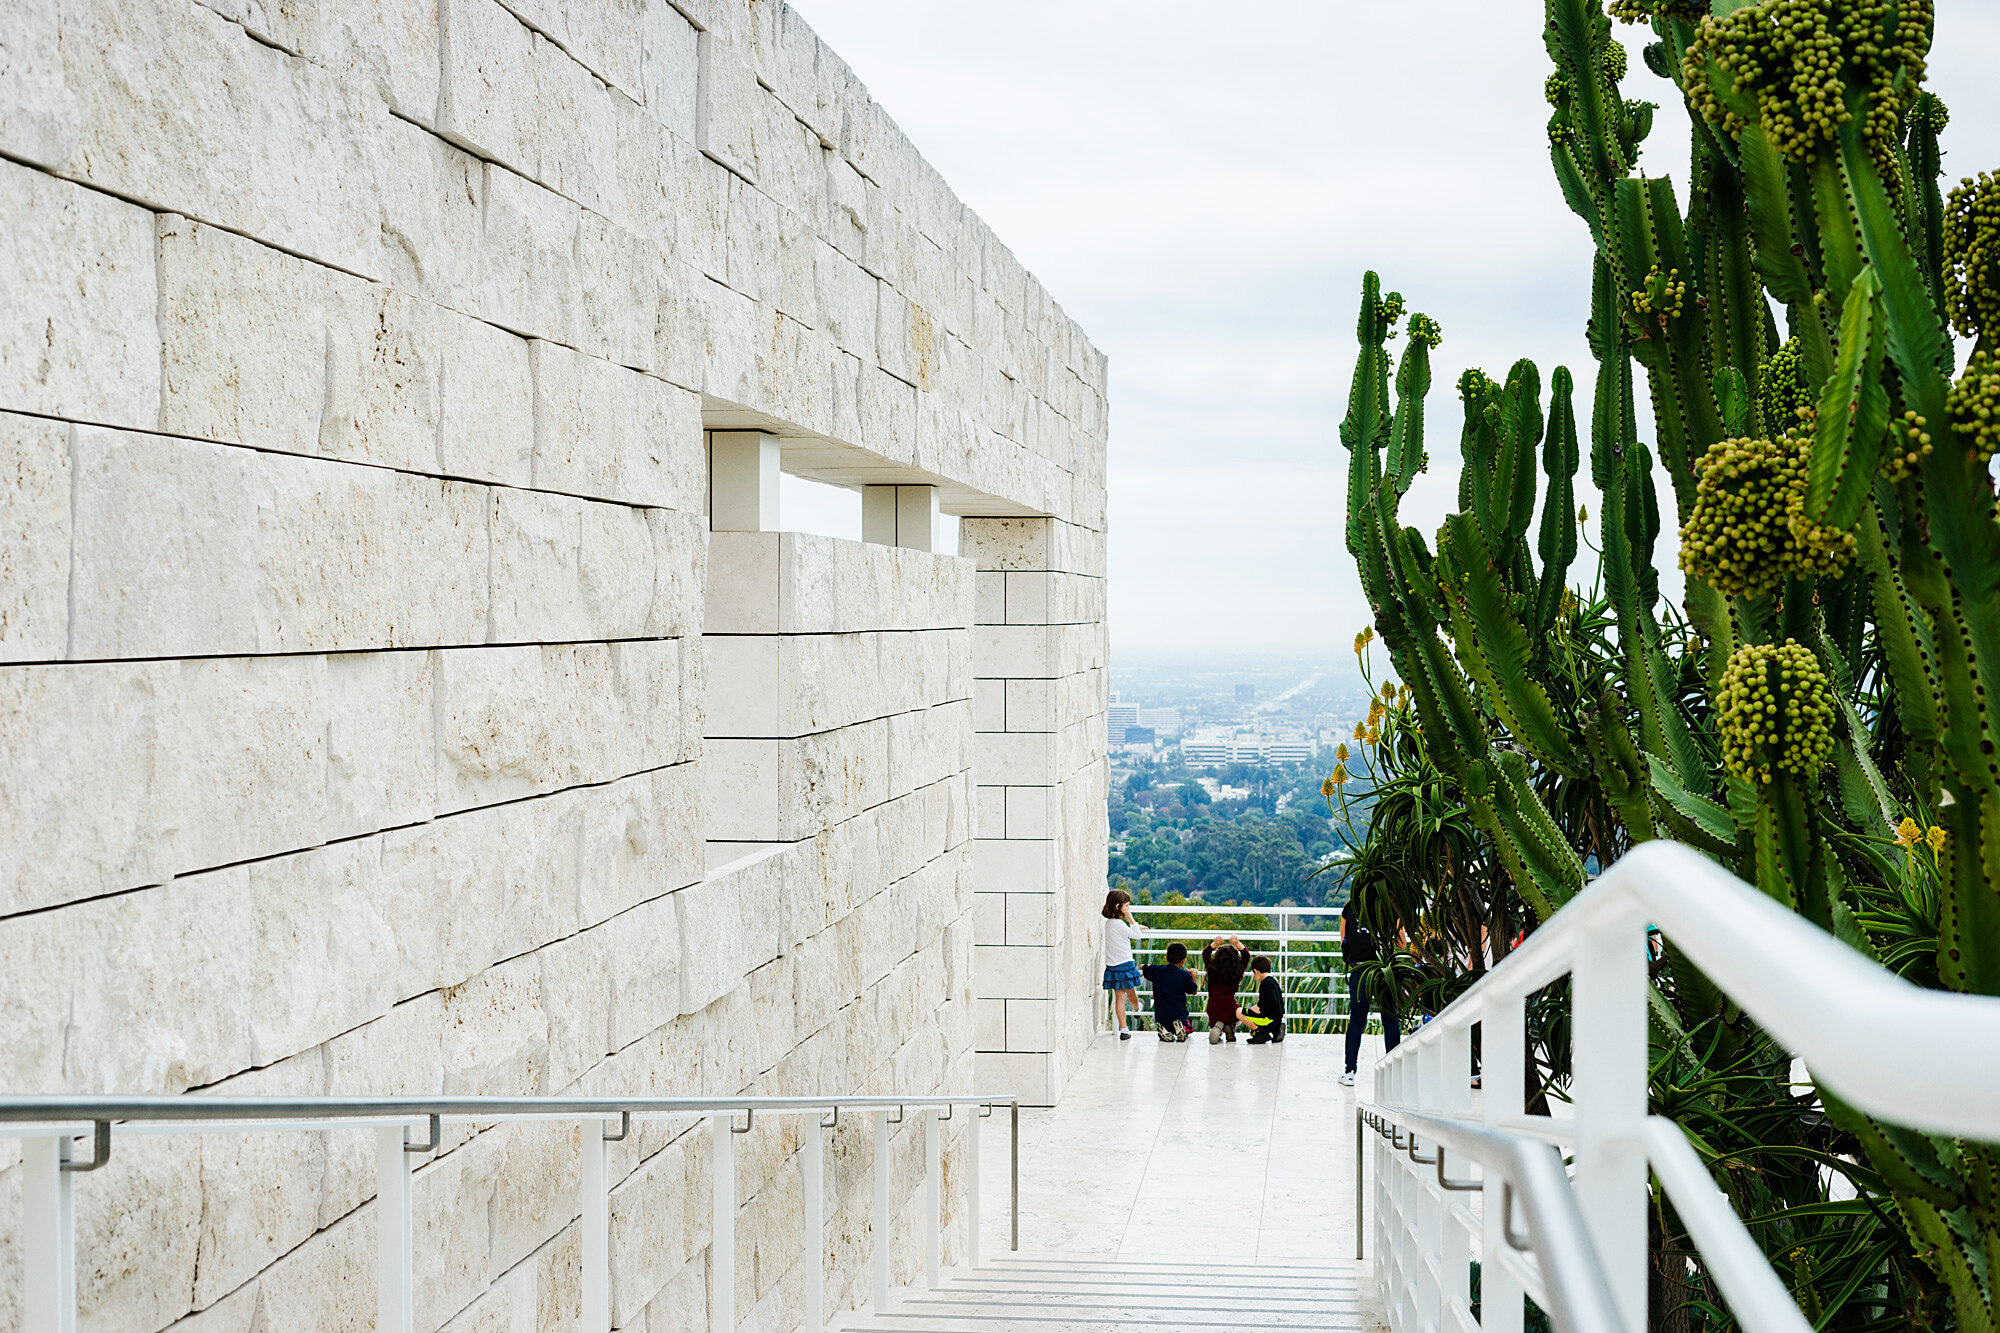 The Getty Center. Overlooking the city, 2016 - Los Angeles